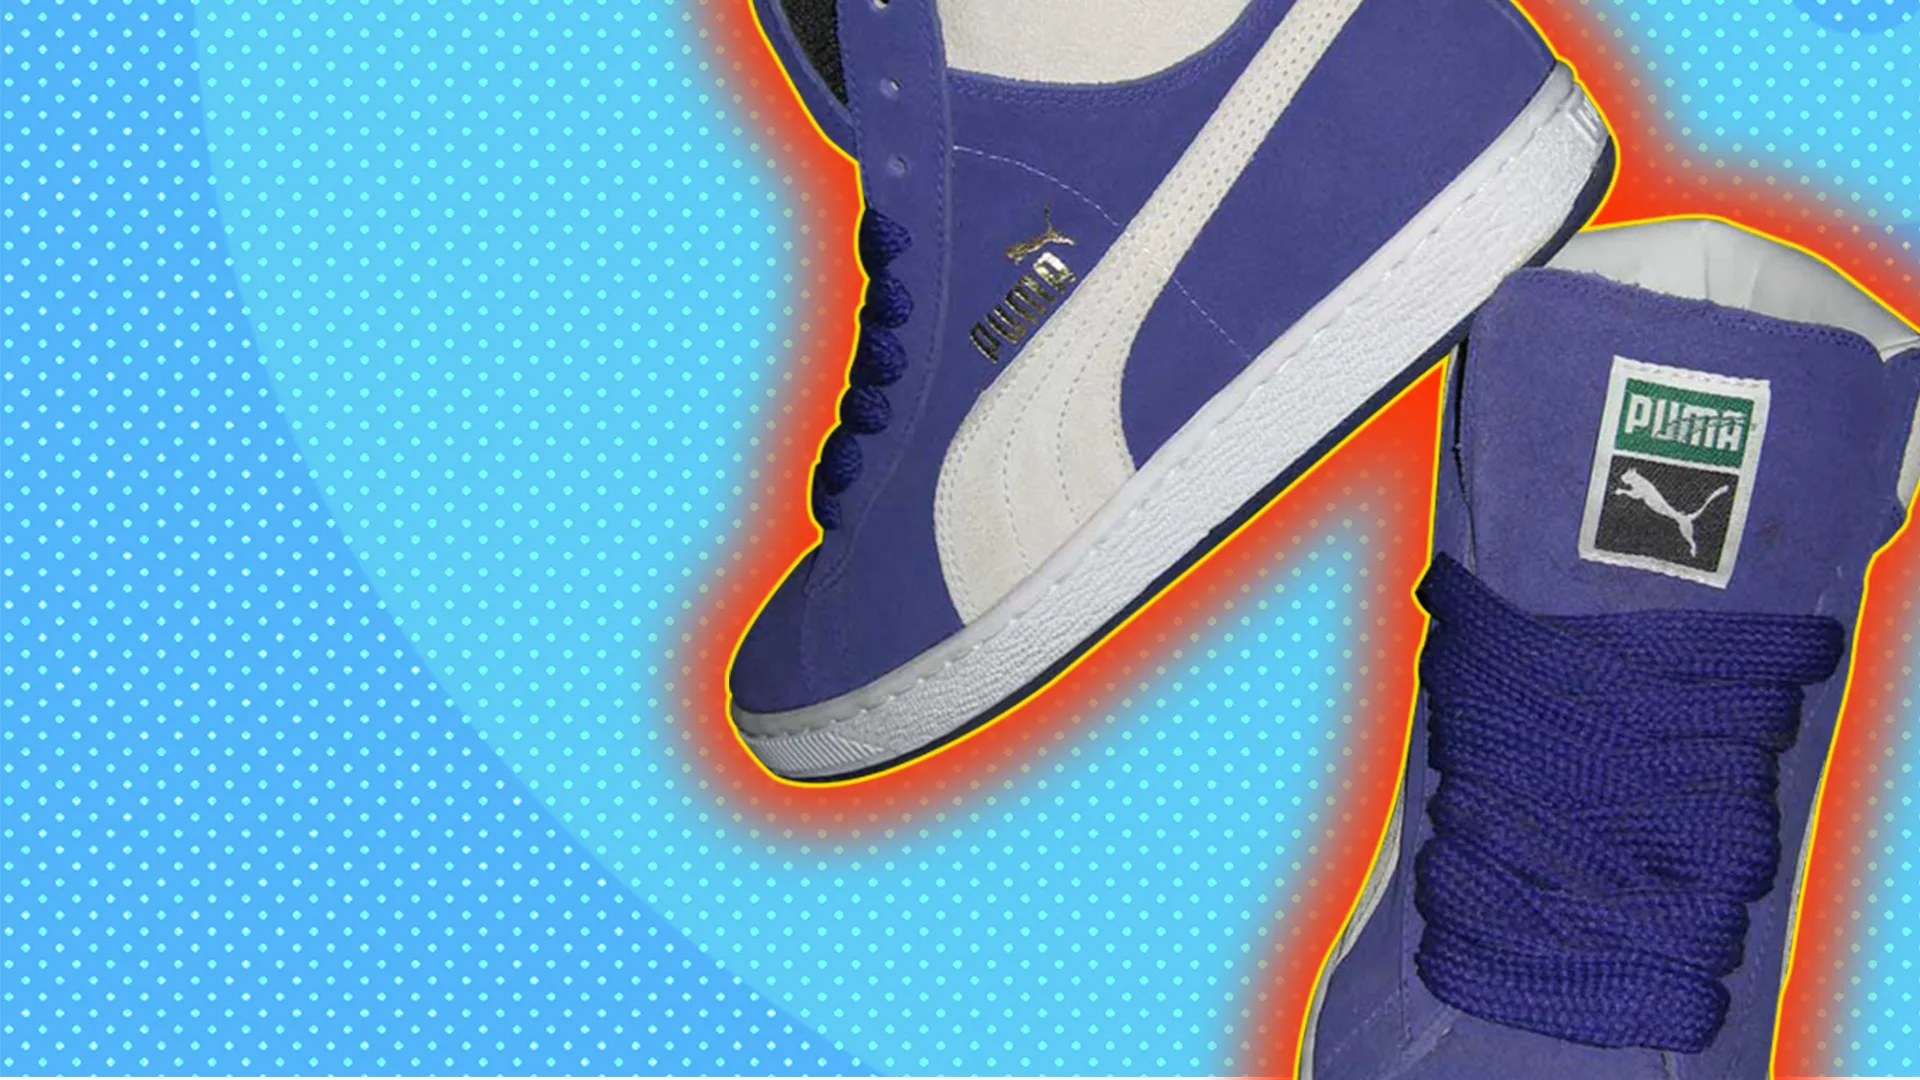 Puma high tops - in graphic house style